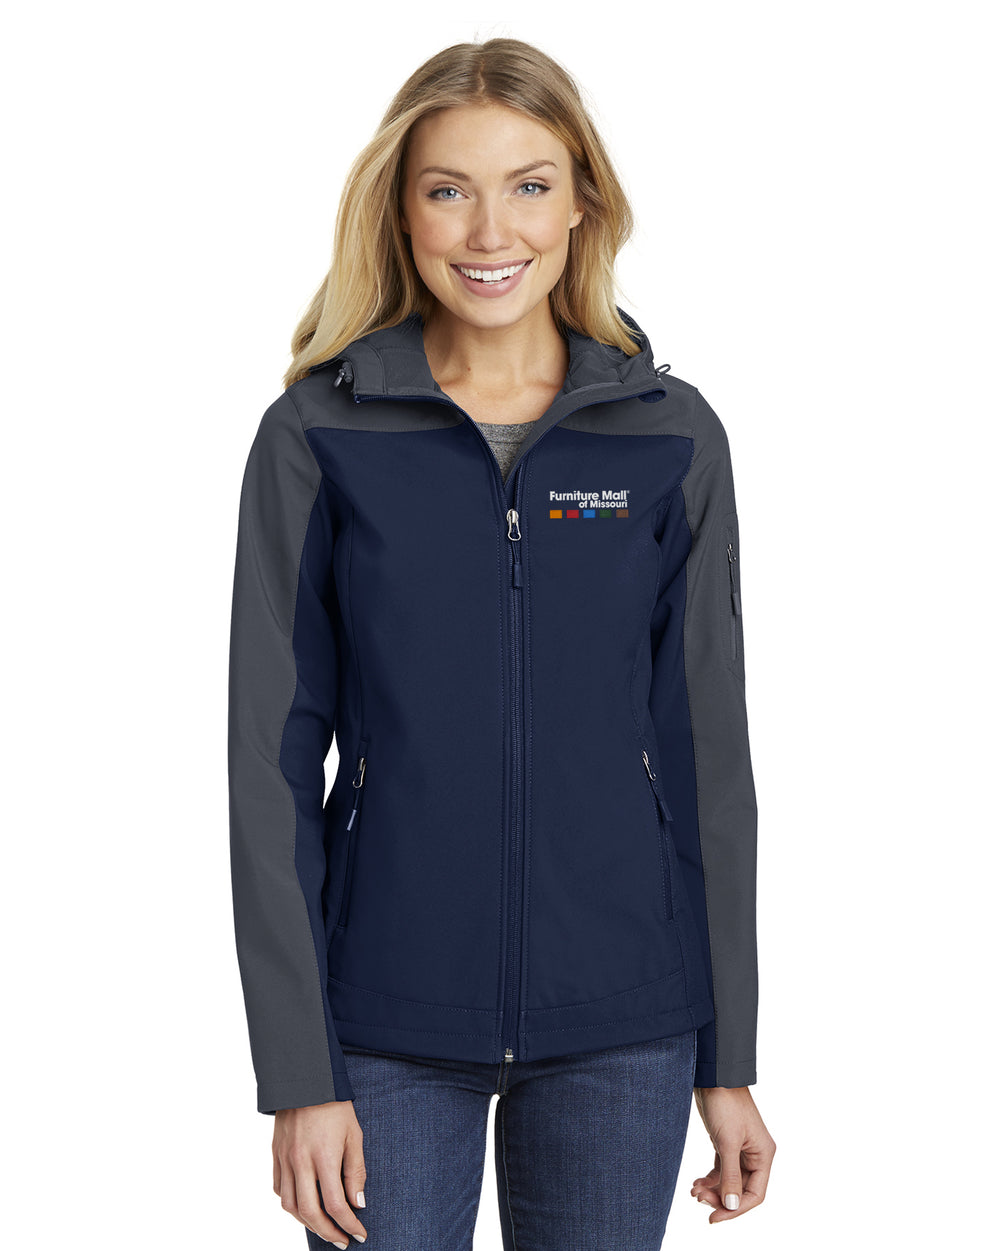 Furniture Mall of Missouri - Port Authority Ladies Hooded Core Soft Shell Jacket - L335